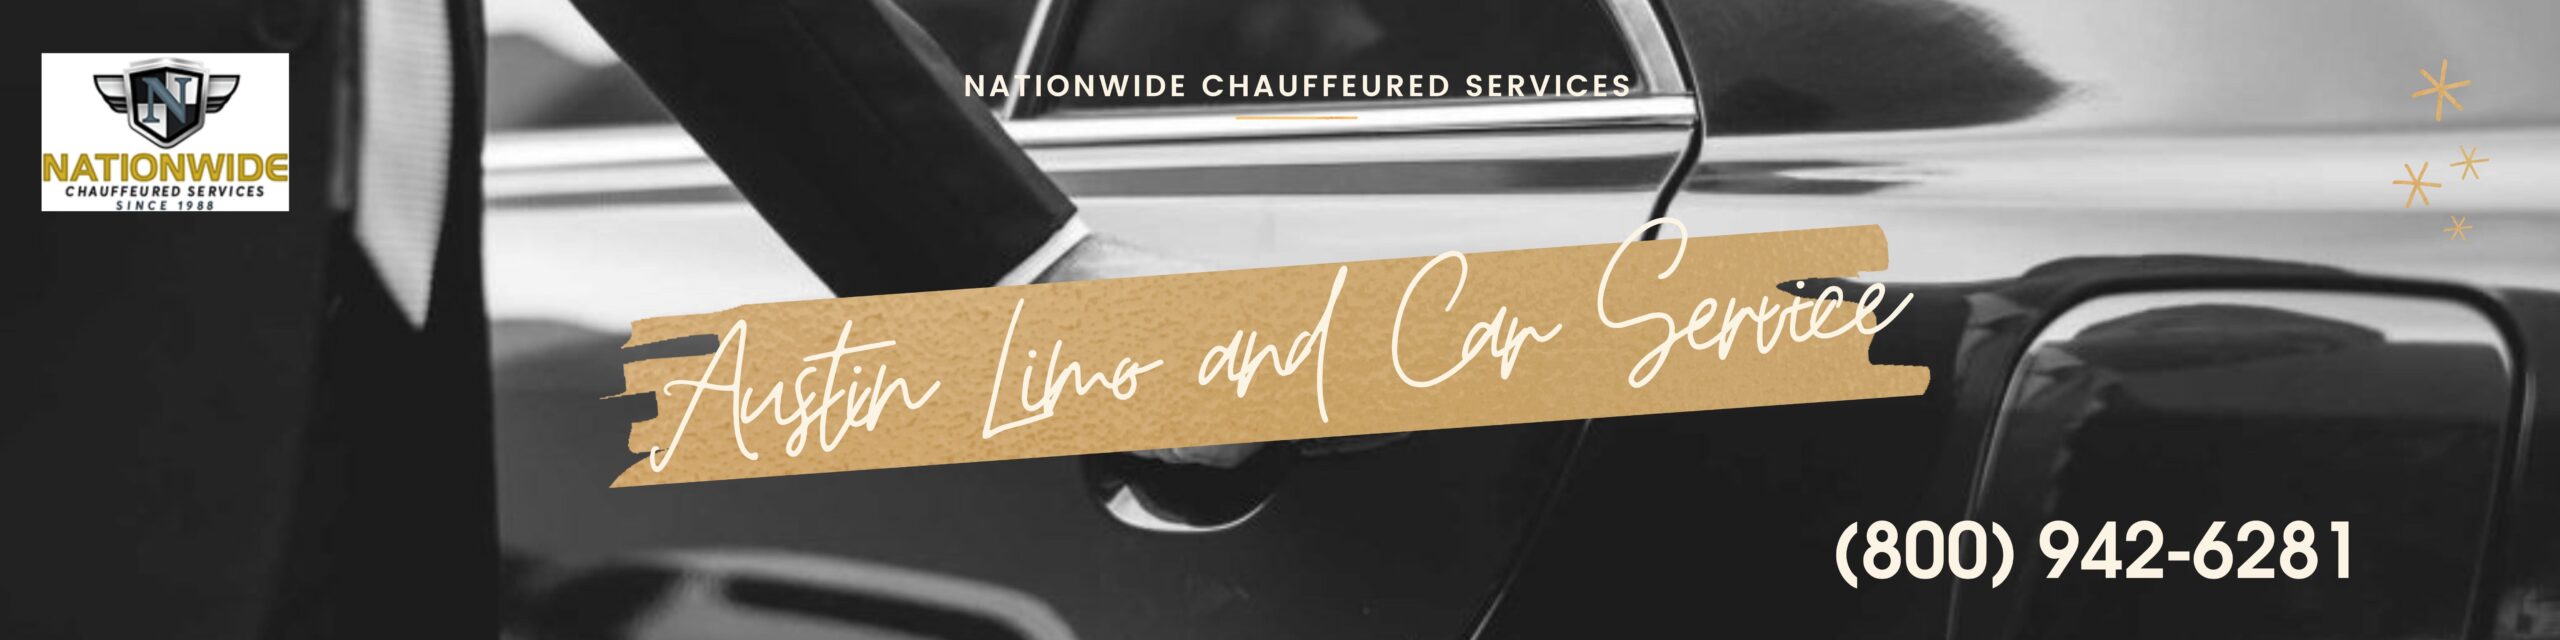 Austin Limo and Car Services